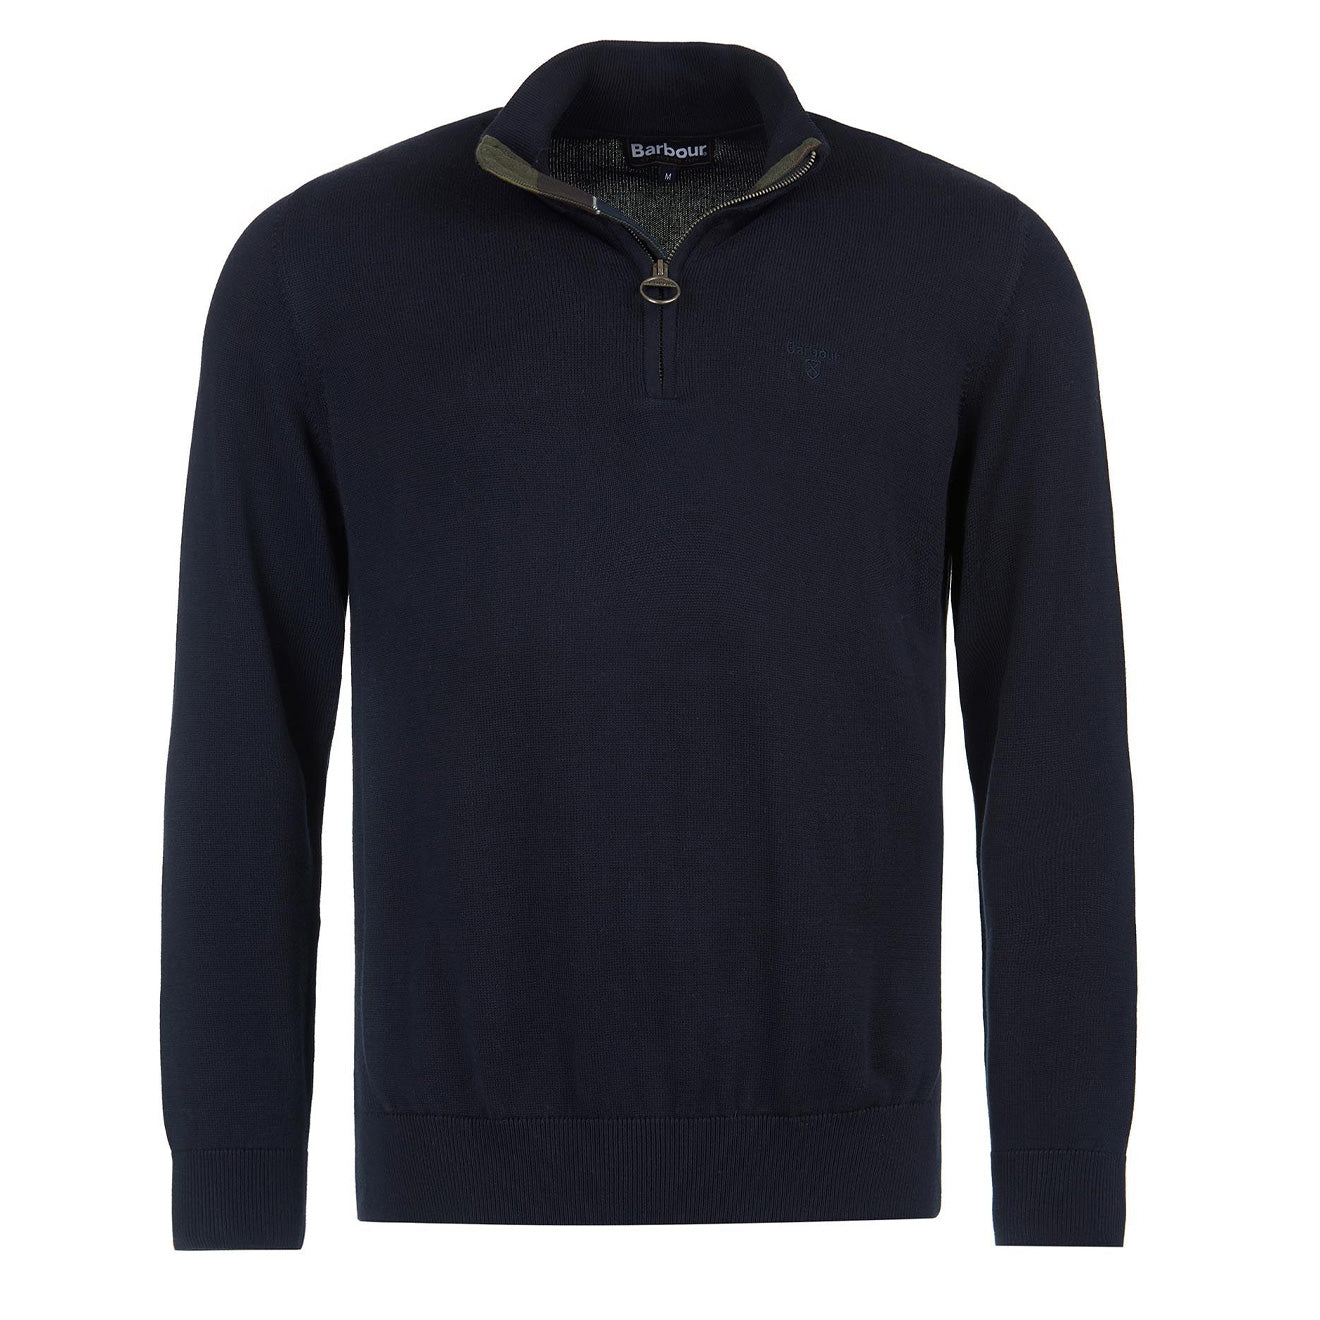 Barbour Cotton Half Zip Sweater Navy | The Sporting Lodge